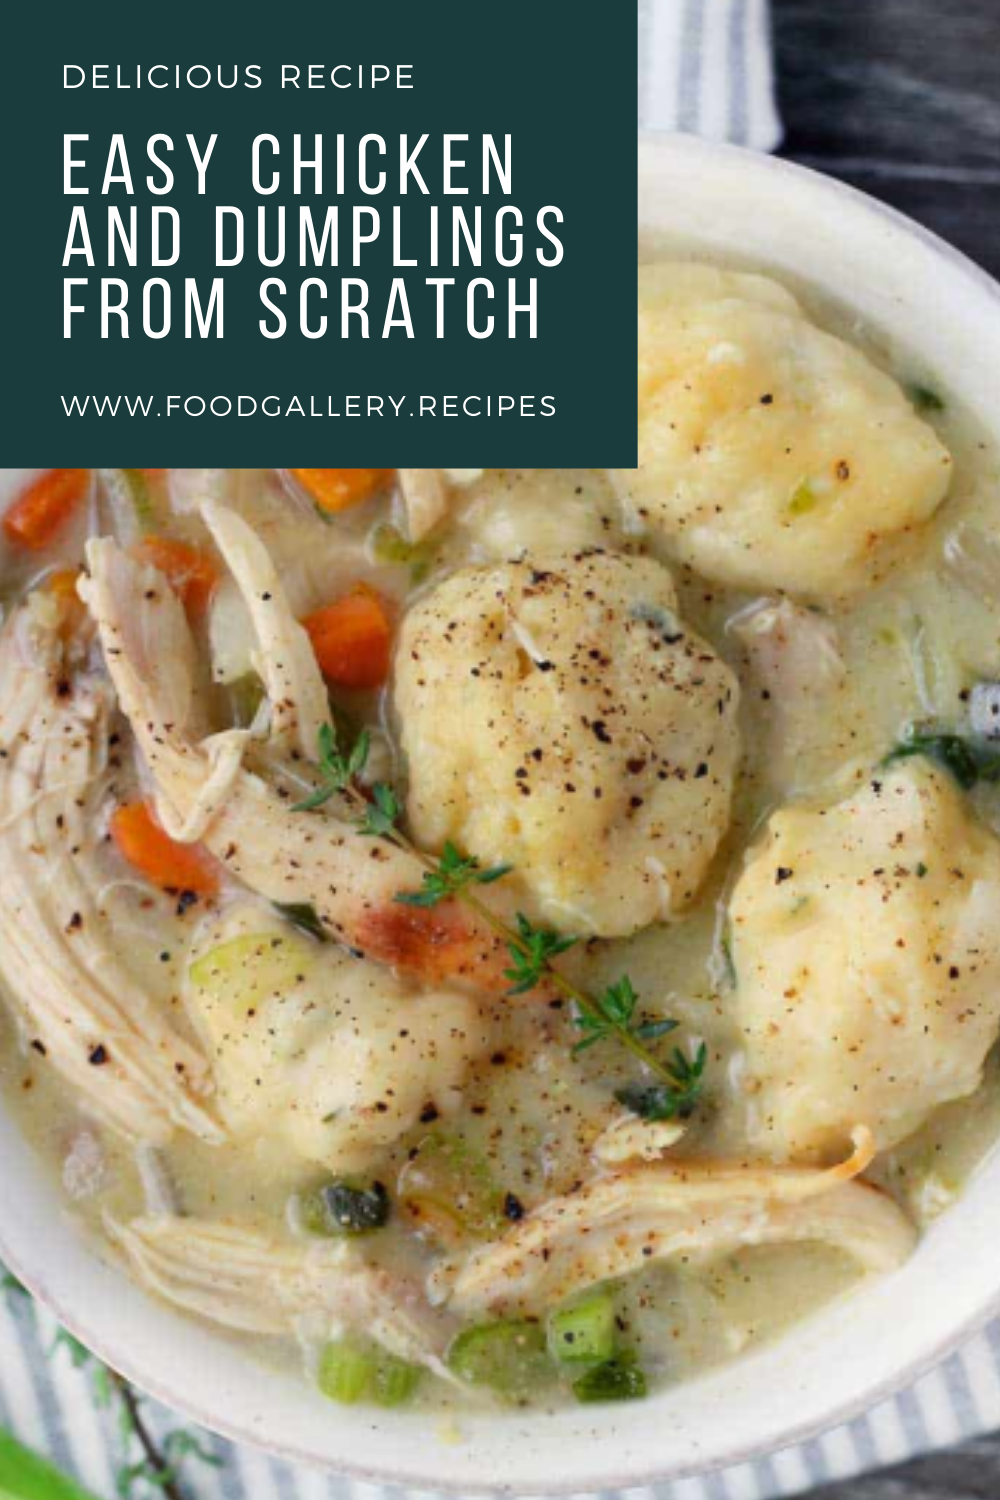 Easy Chicken and Dumplings from Scratch - Health Autos